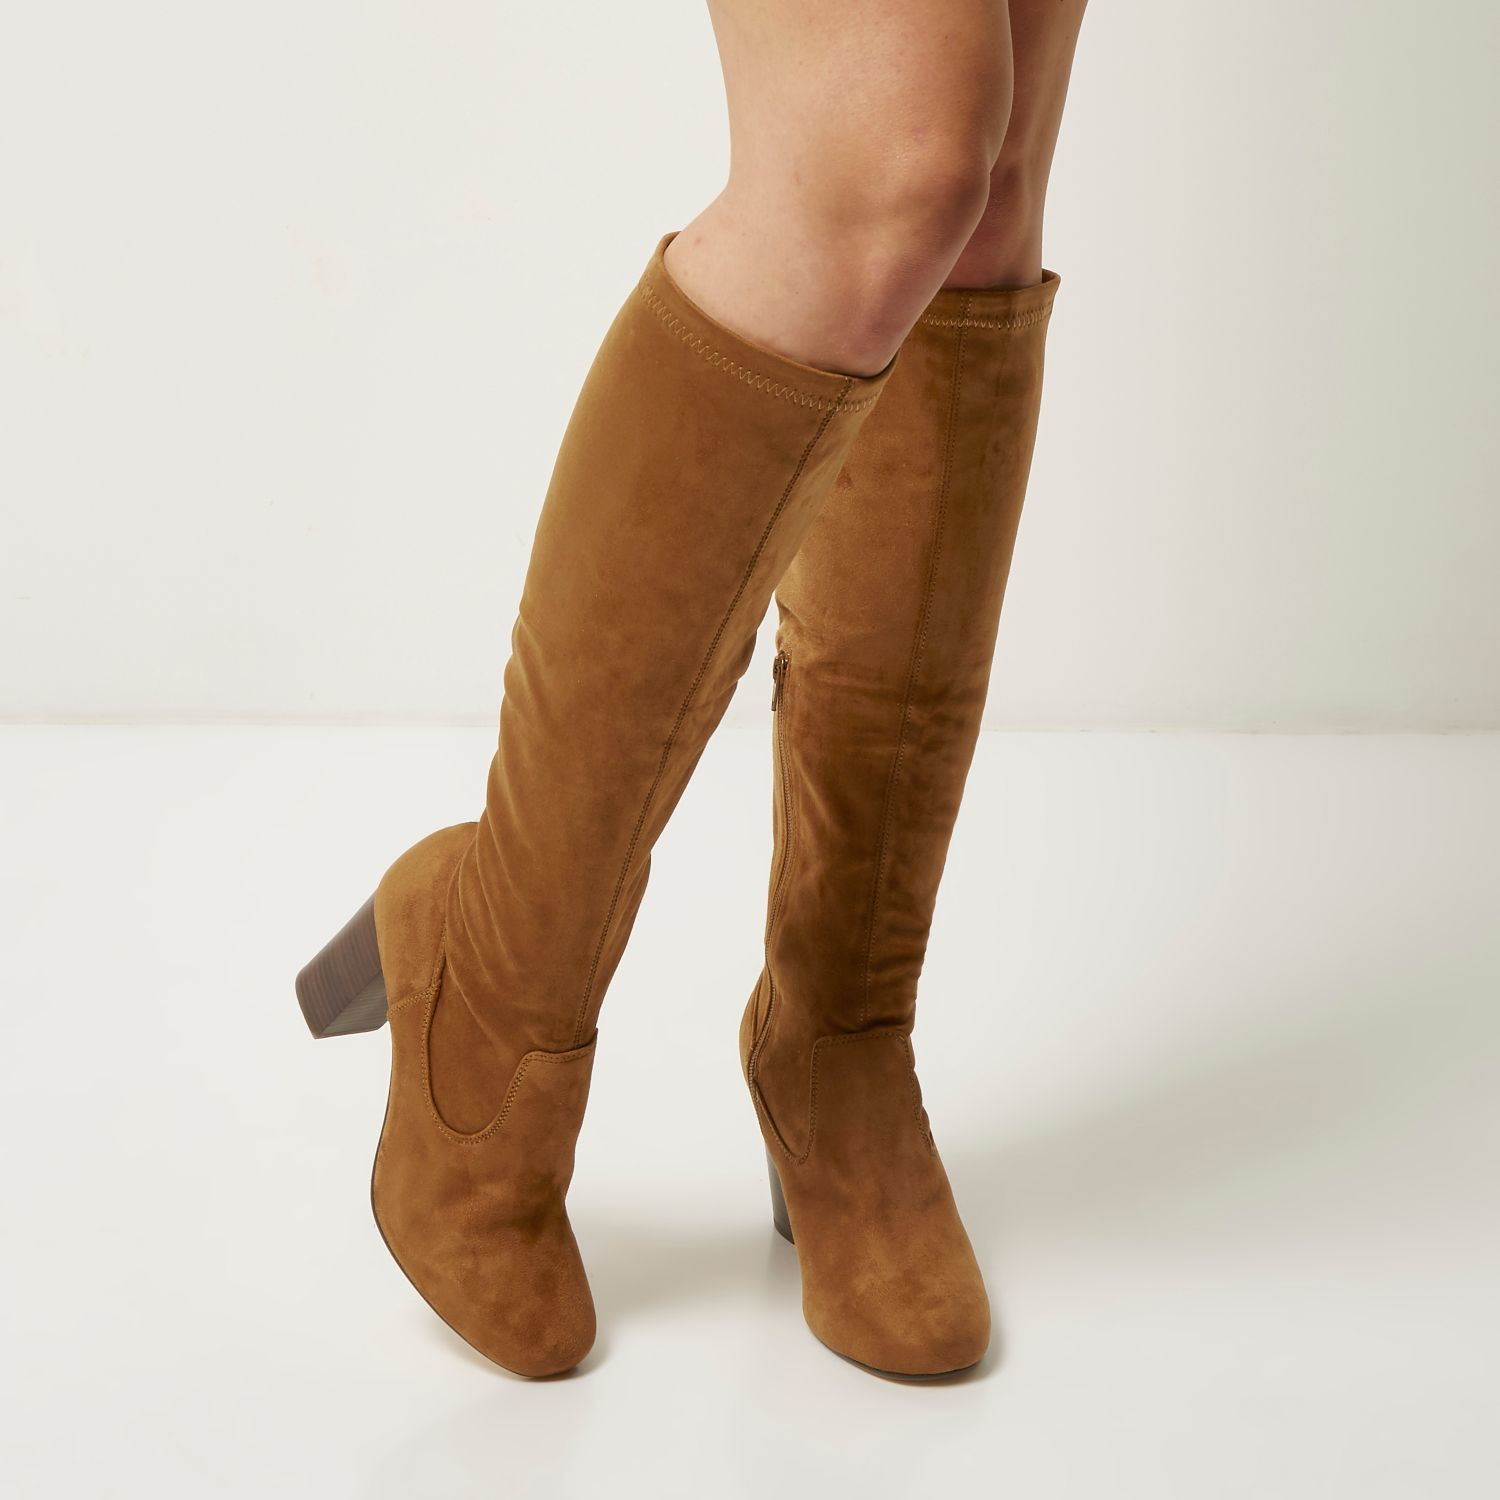 Sale > suede boots knee high > in stock